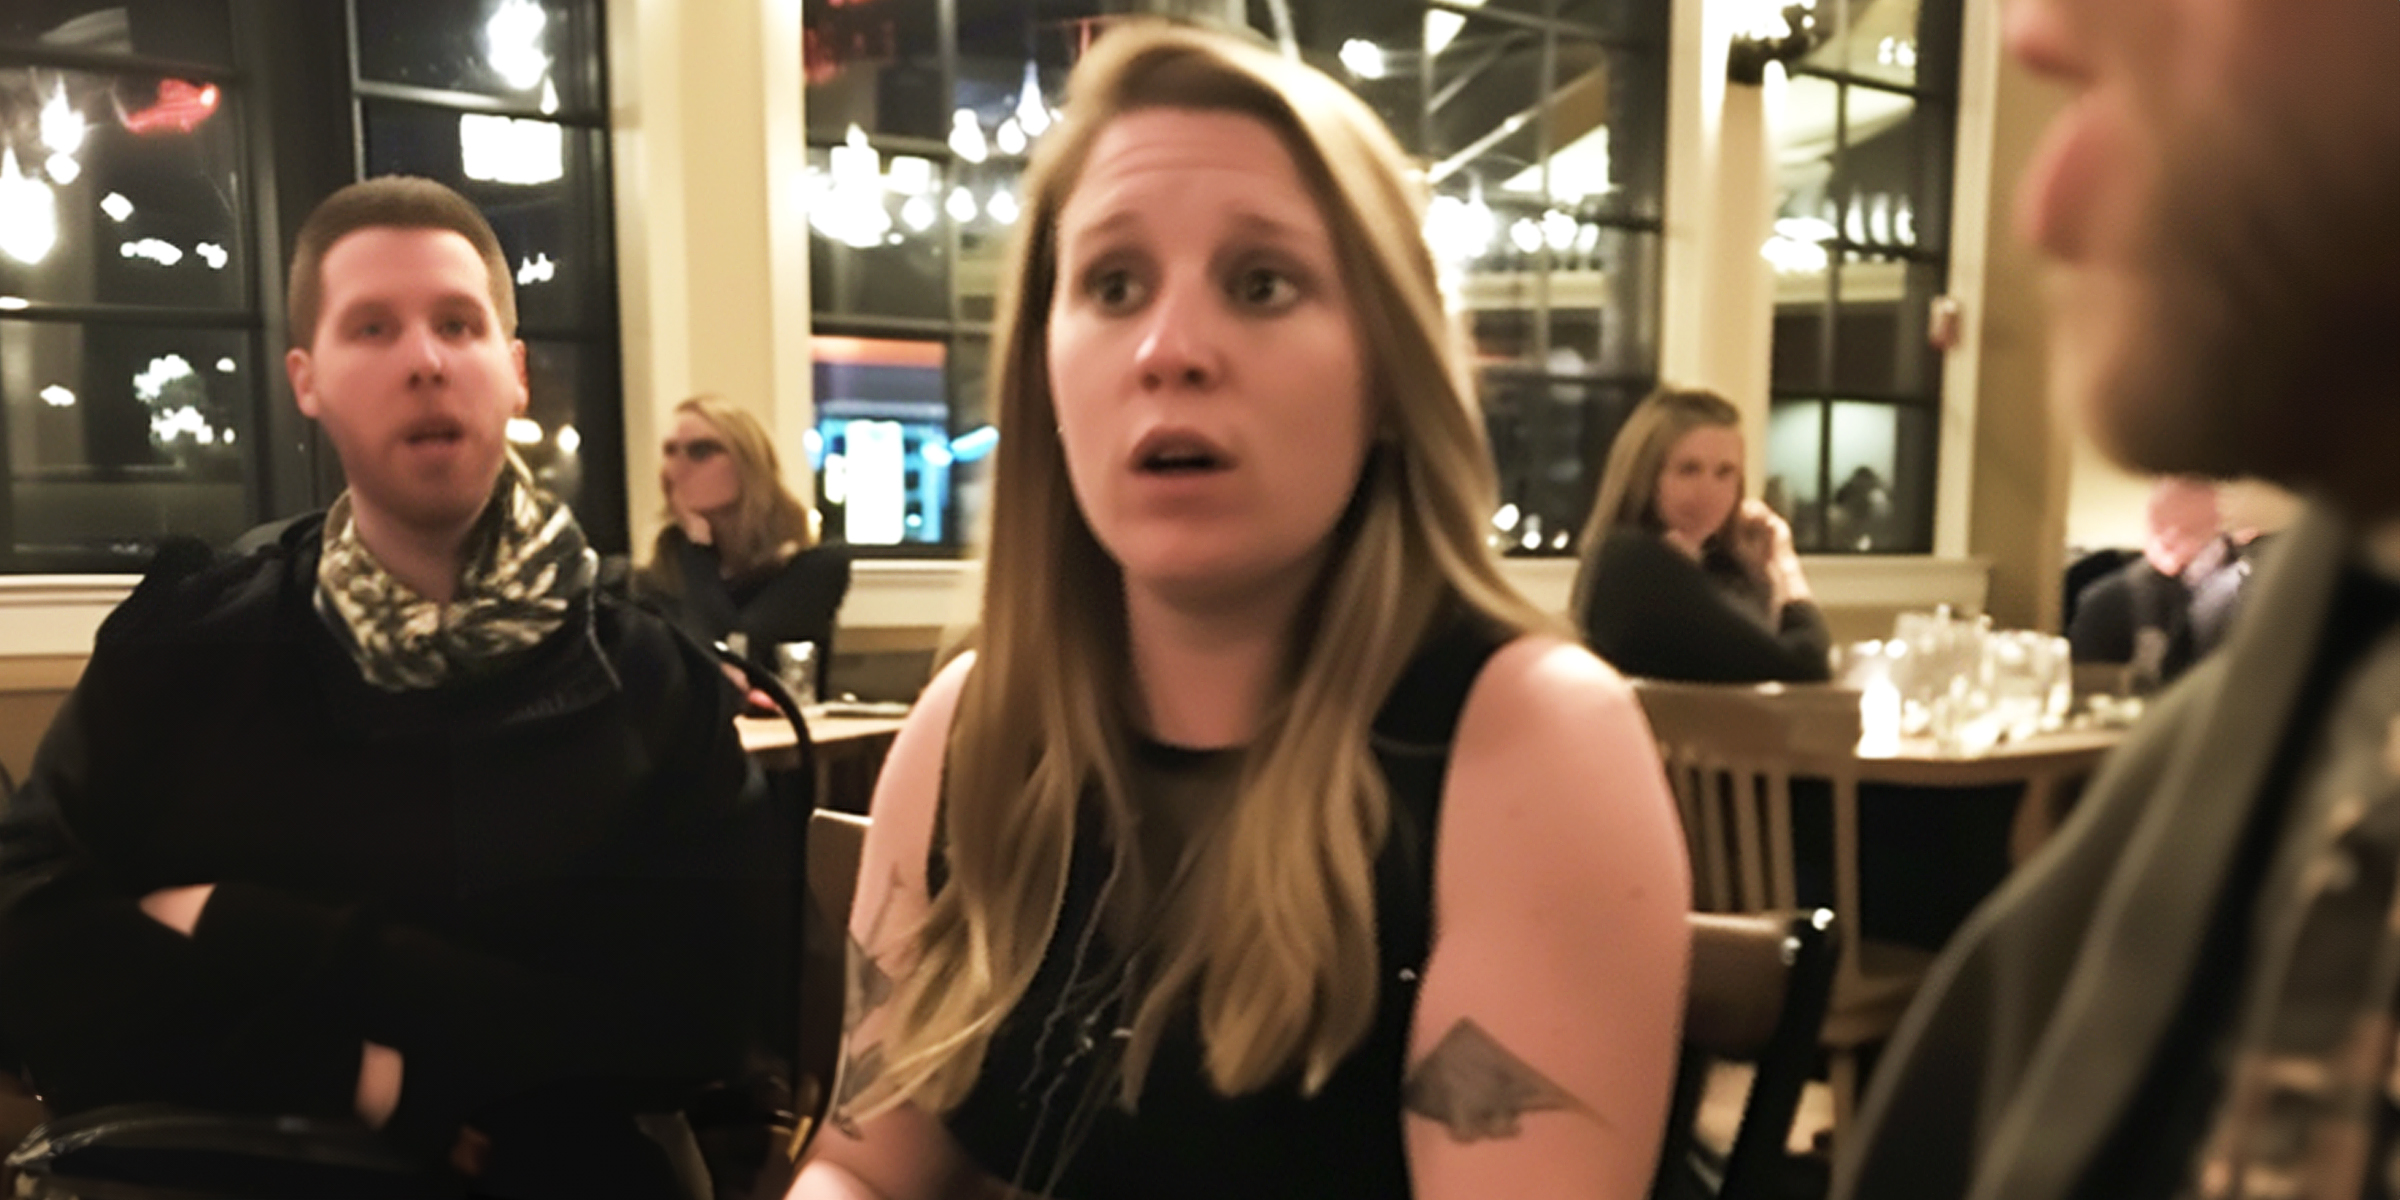 A shocked woman in a restaurant | Source: AmoMama